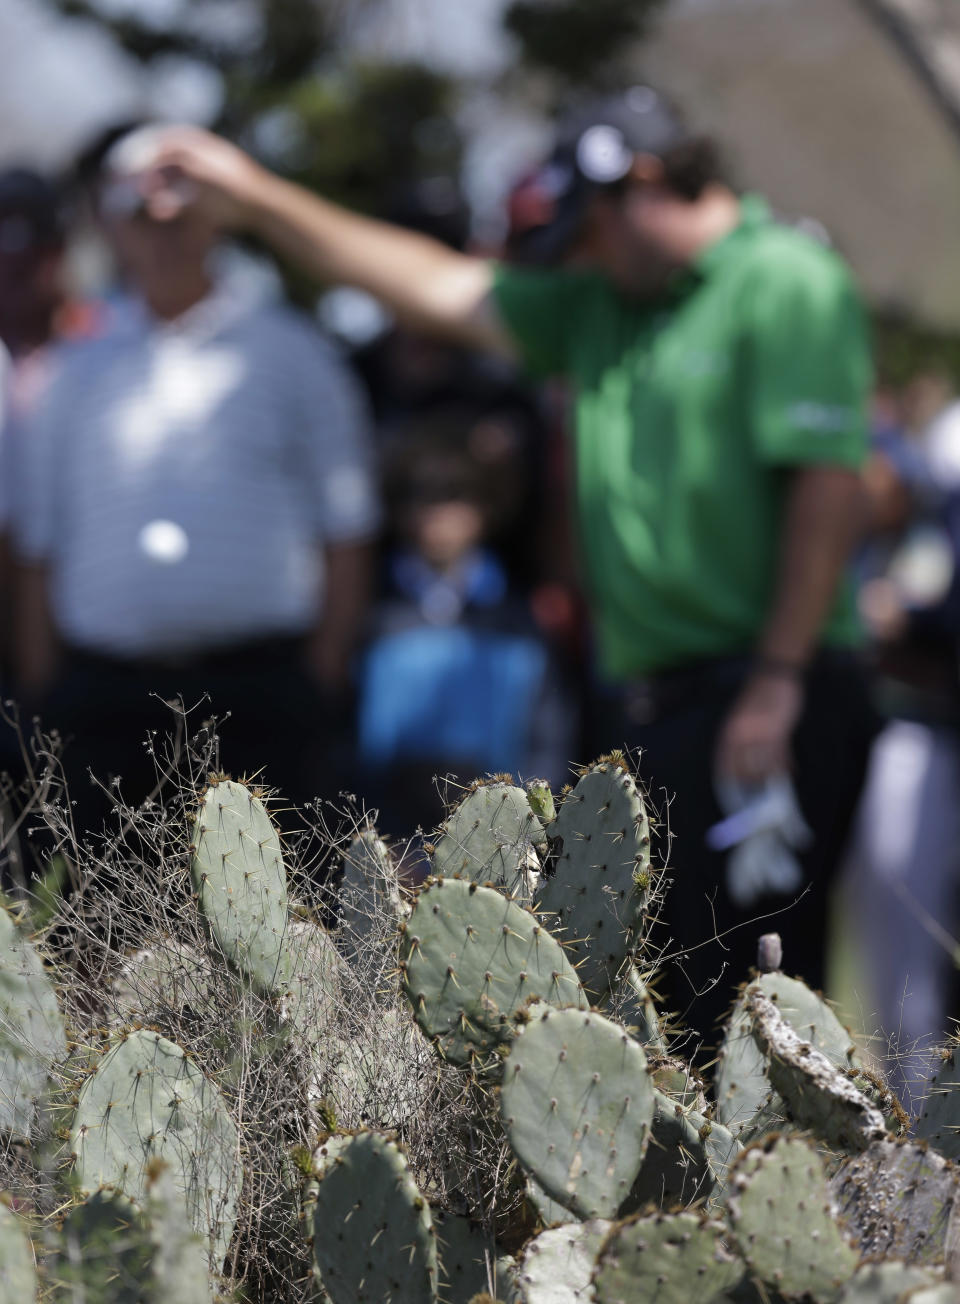 Steven Bowditch, of Australia, takes a drop after hitting into cactus in the second hole during the final round of the Texas Open golf tournament on Sunday, March 30, 2014, in San Antonio. (AP Photo/Eric Gay)